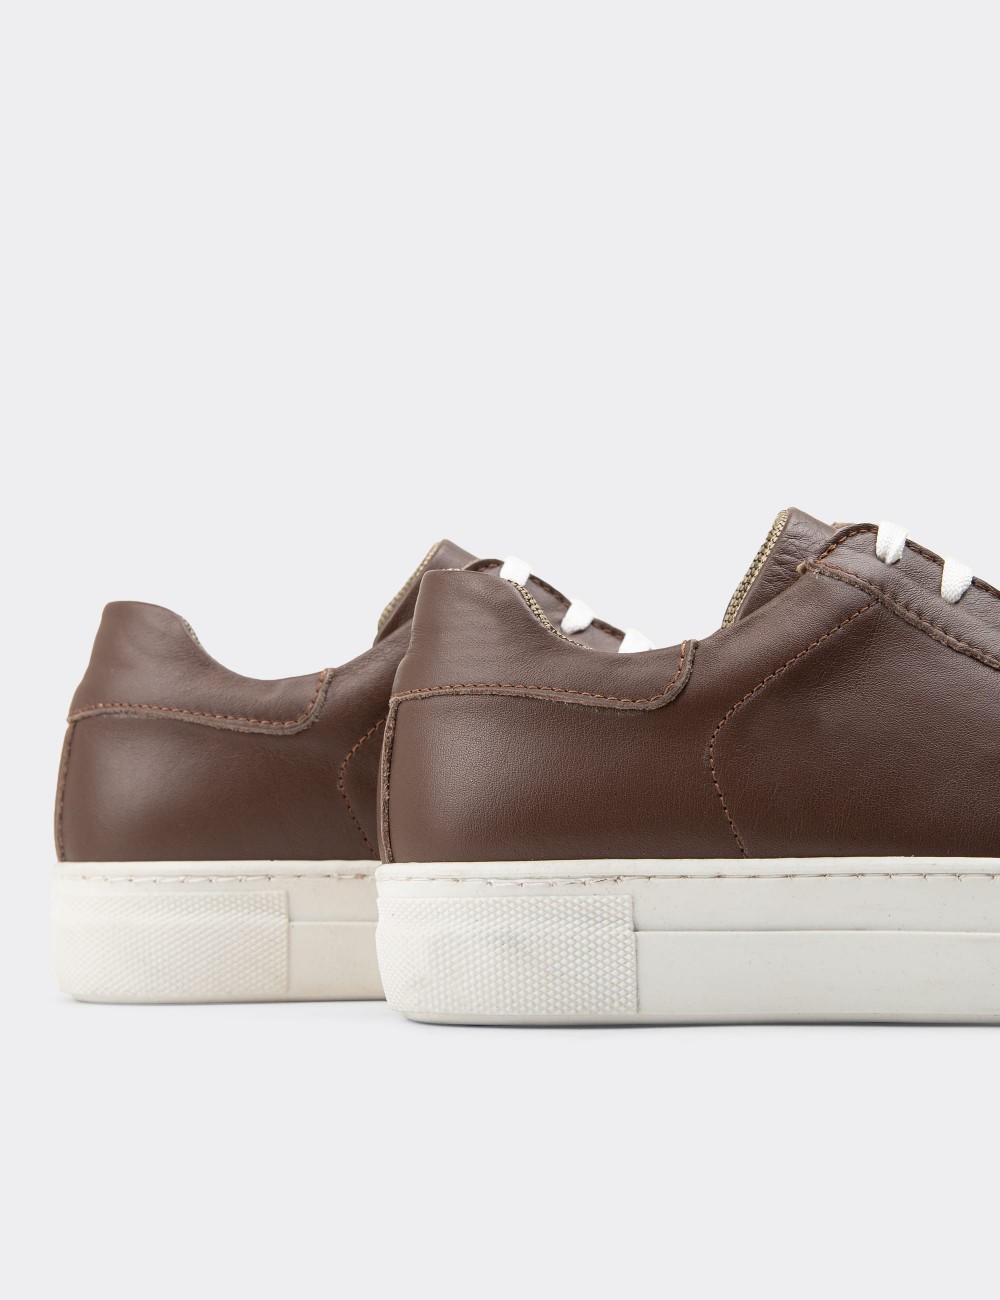 Brown  Leather Sneakers - Z1681ZKHVC08